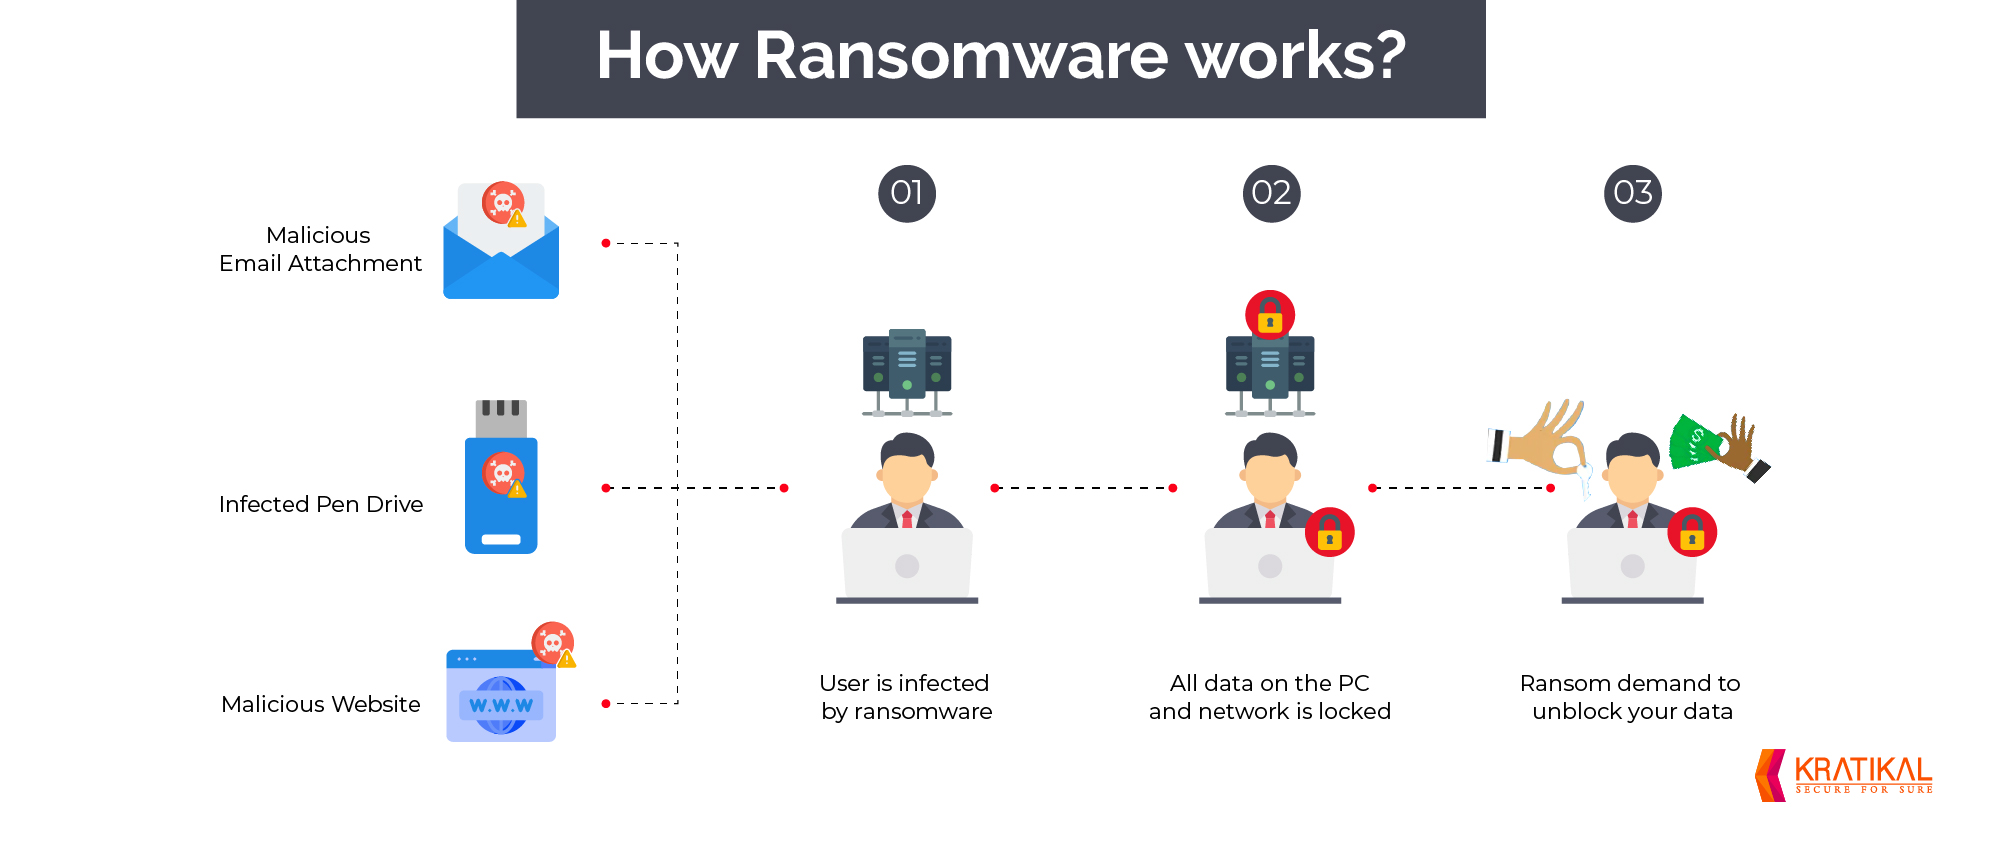 How Ransomware Works